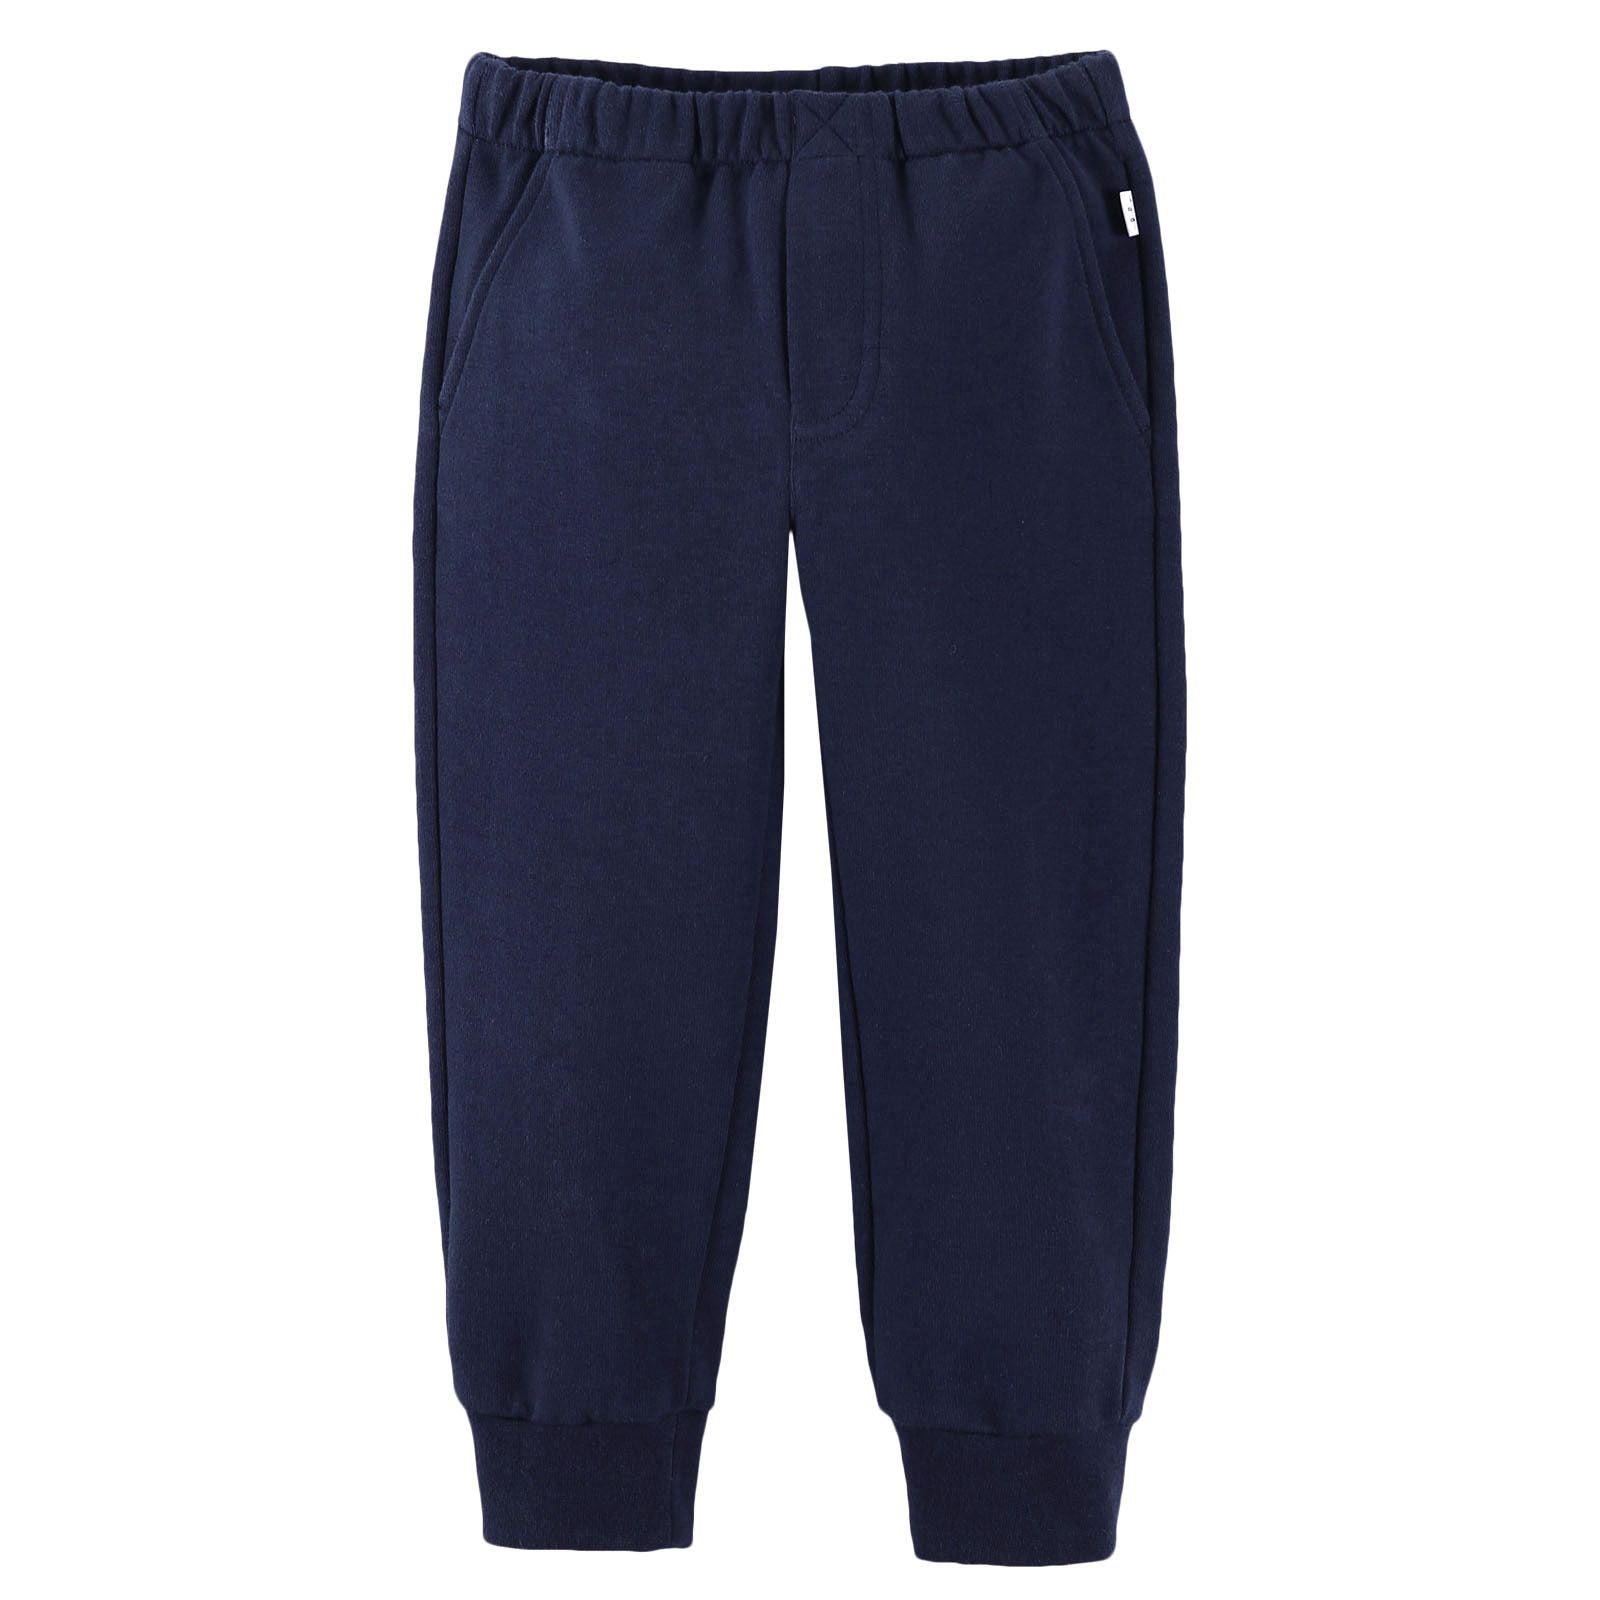 Boys Navy Blue Cotton Trousers With Ribbed Hems - CÉMAROSE | Children's Fashion Store - 1